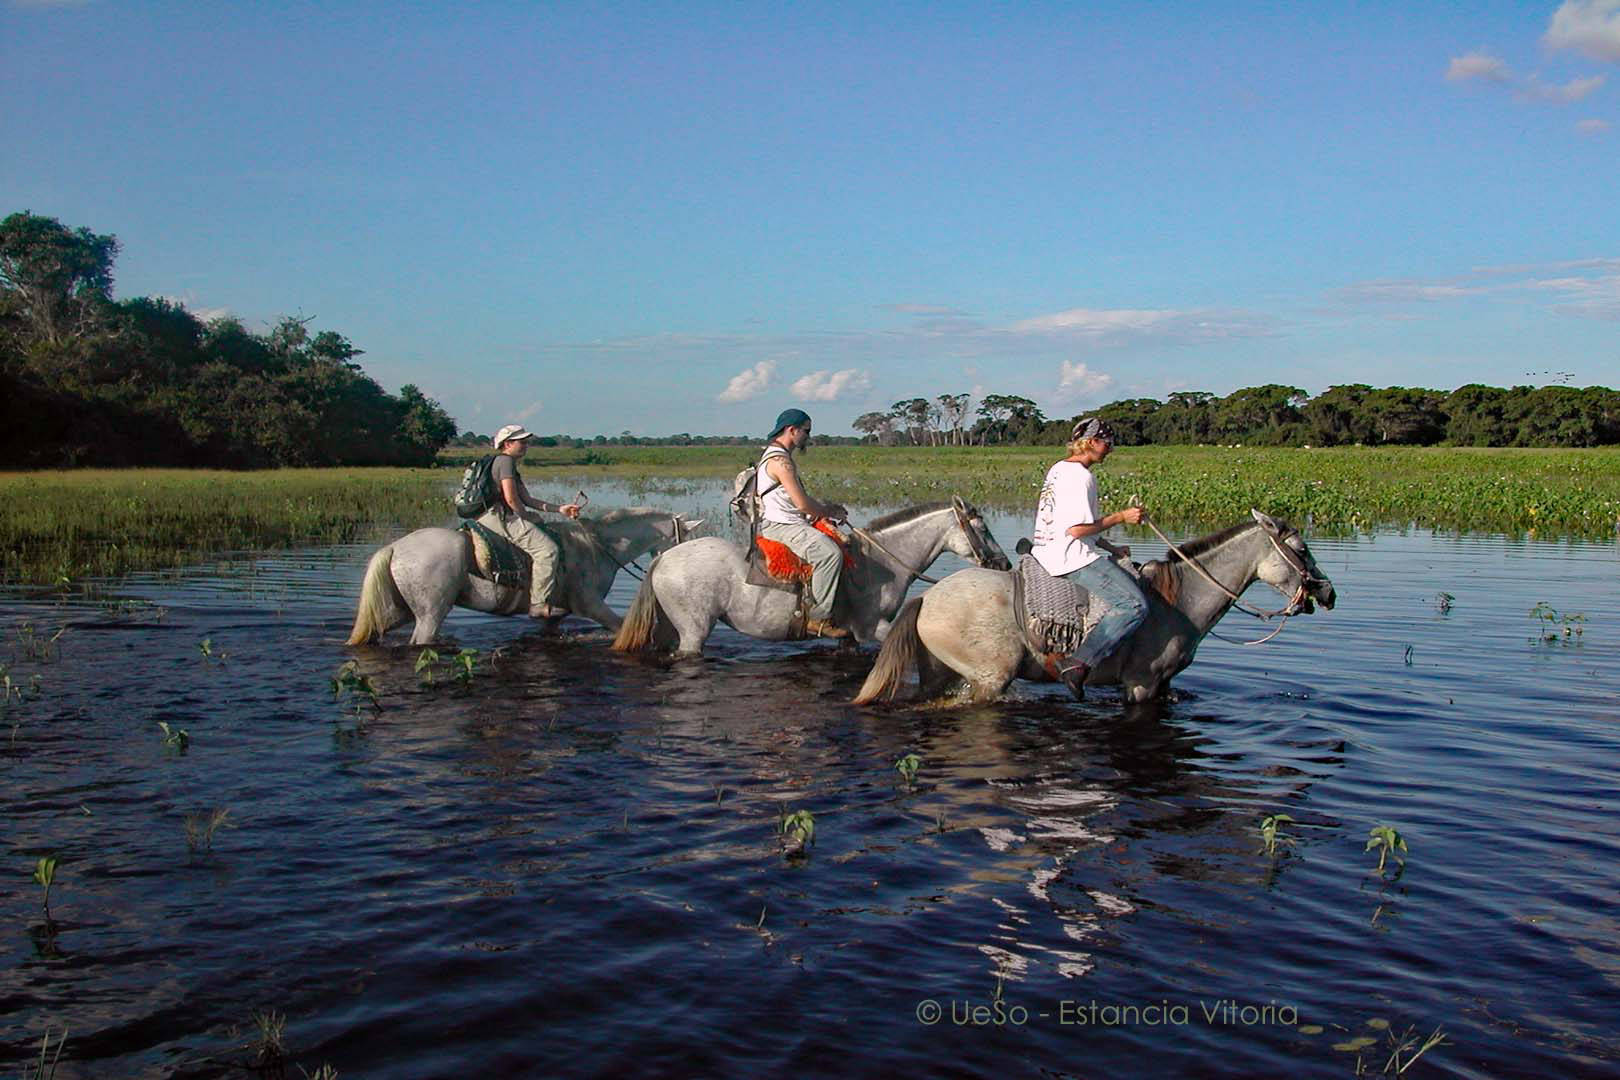 Tour with the horses in wetland